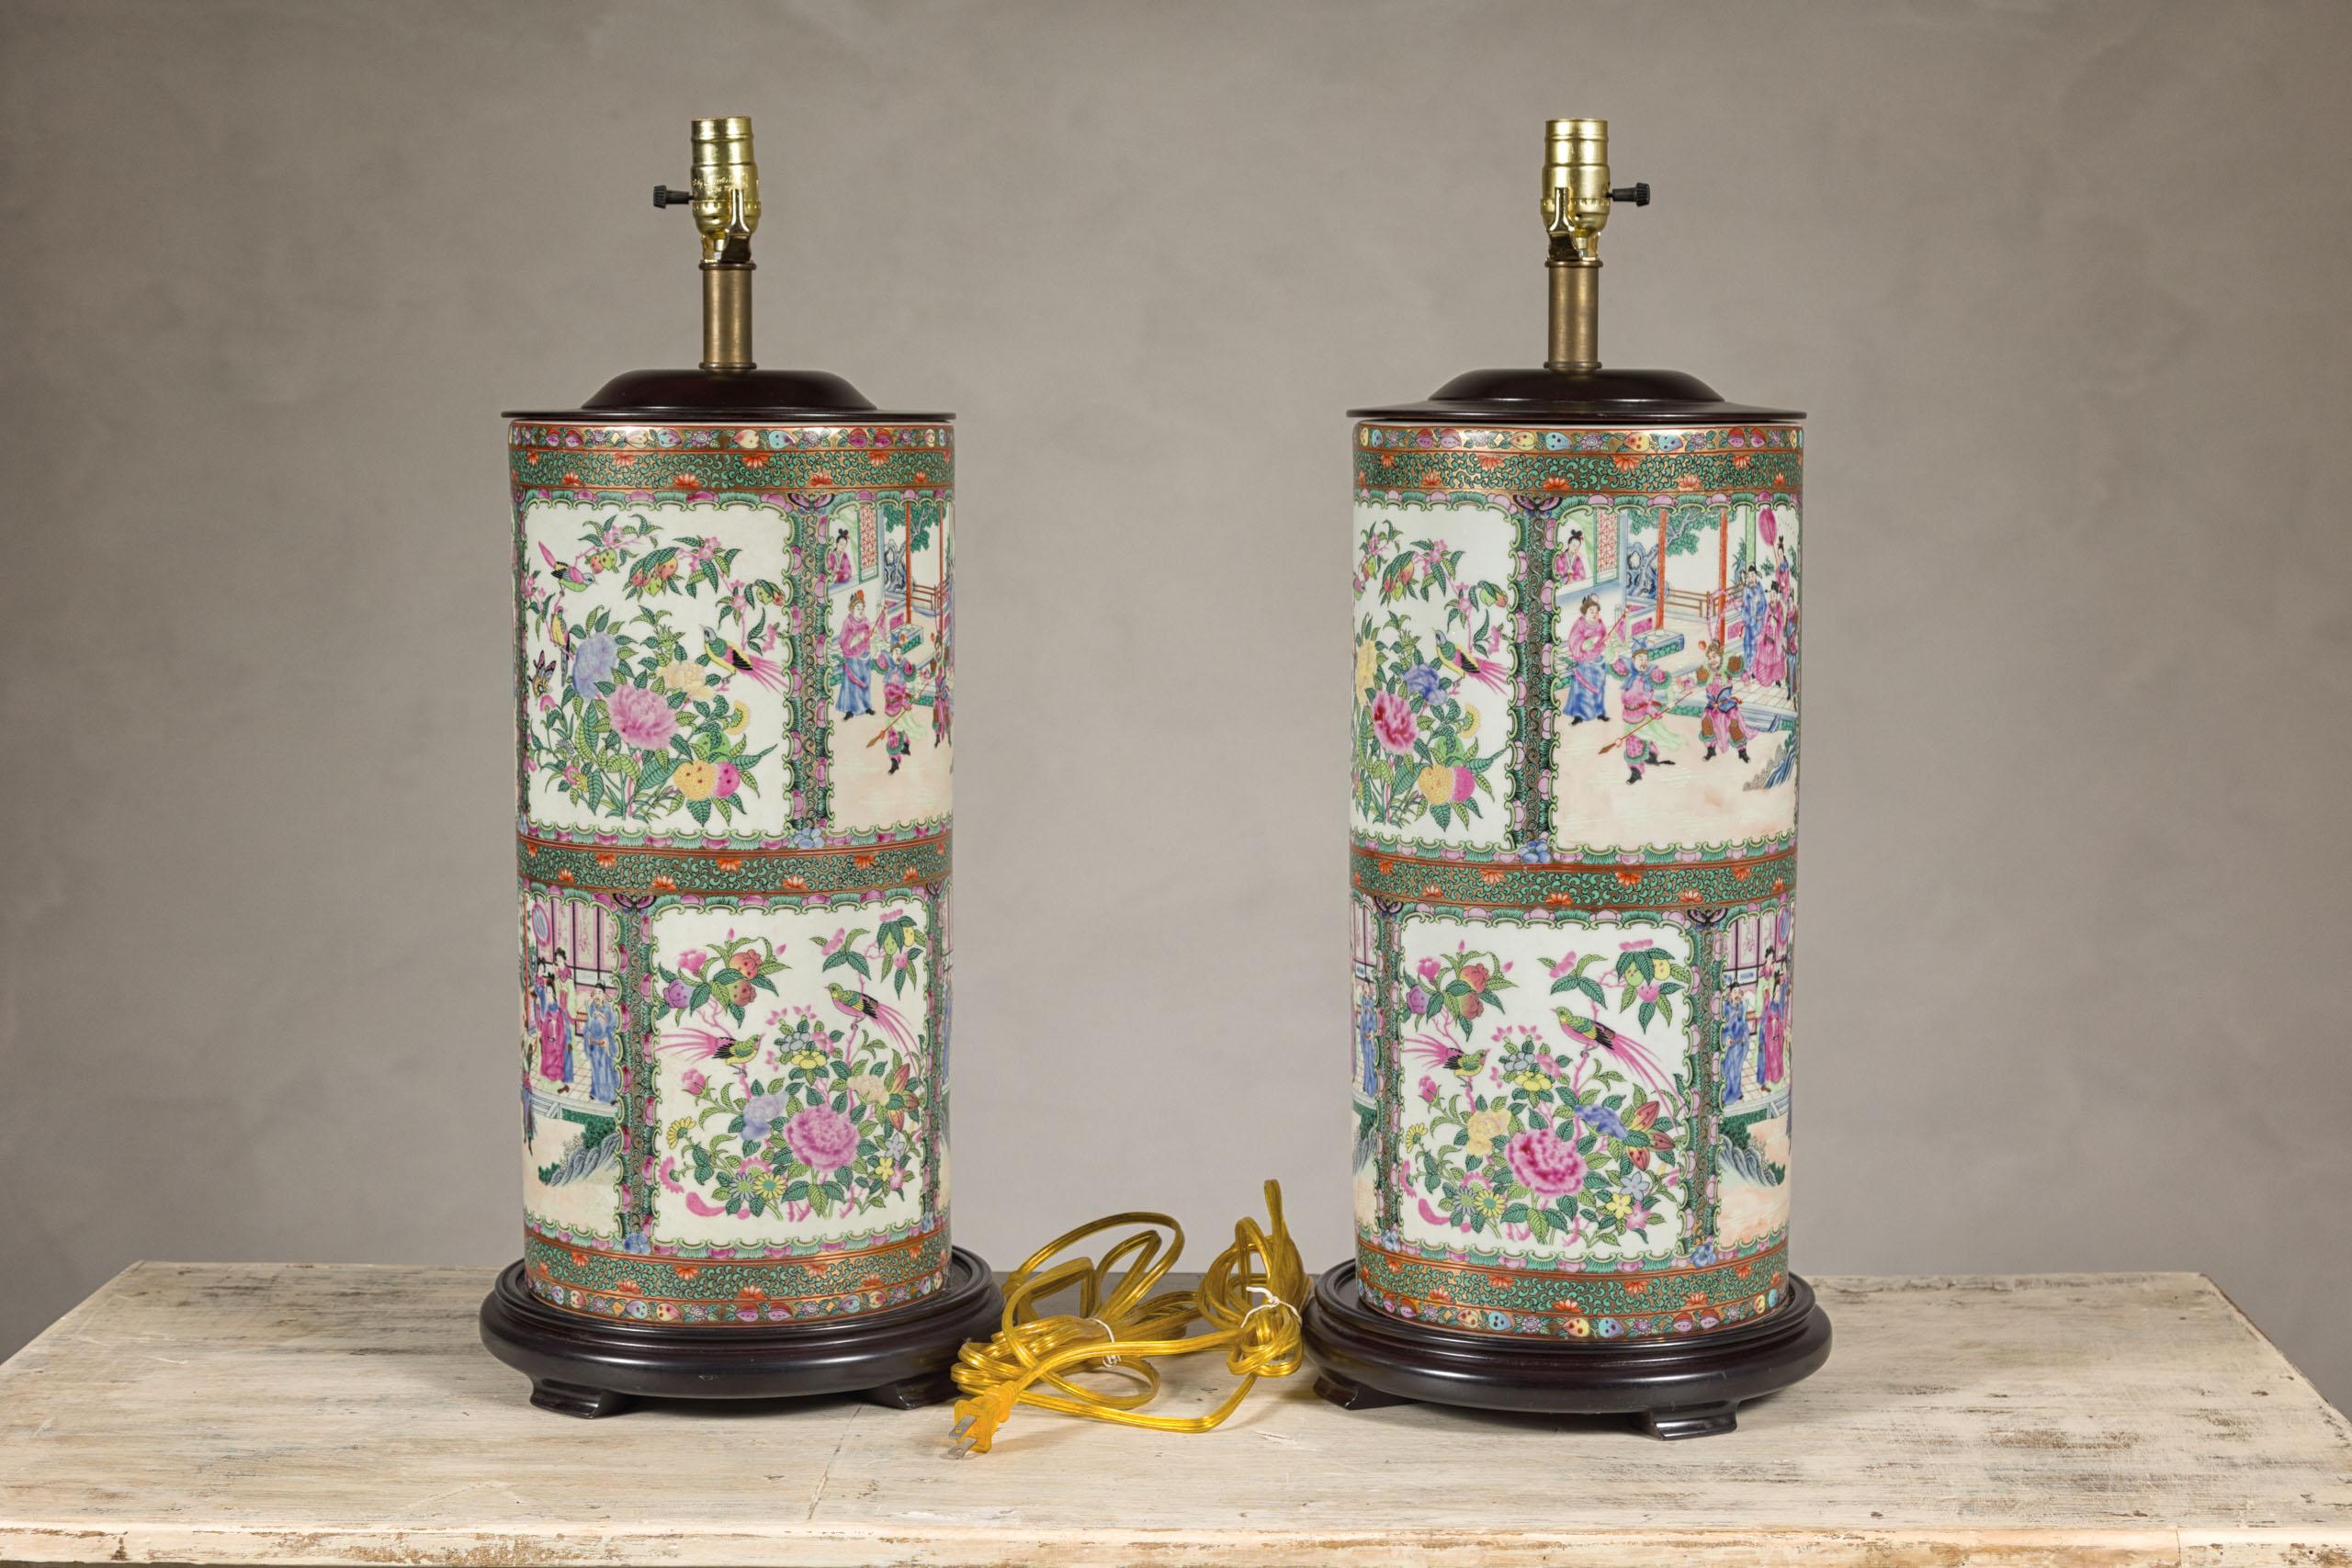 Pair of Hand-Painted Rose Medallion Table Lamps with Court Scenes and Birds For Sale 5